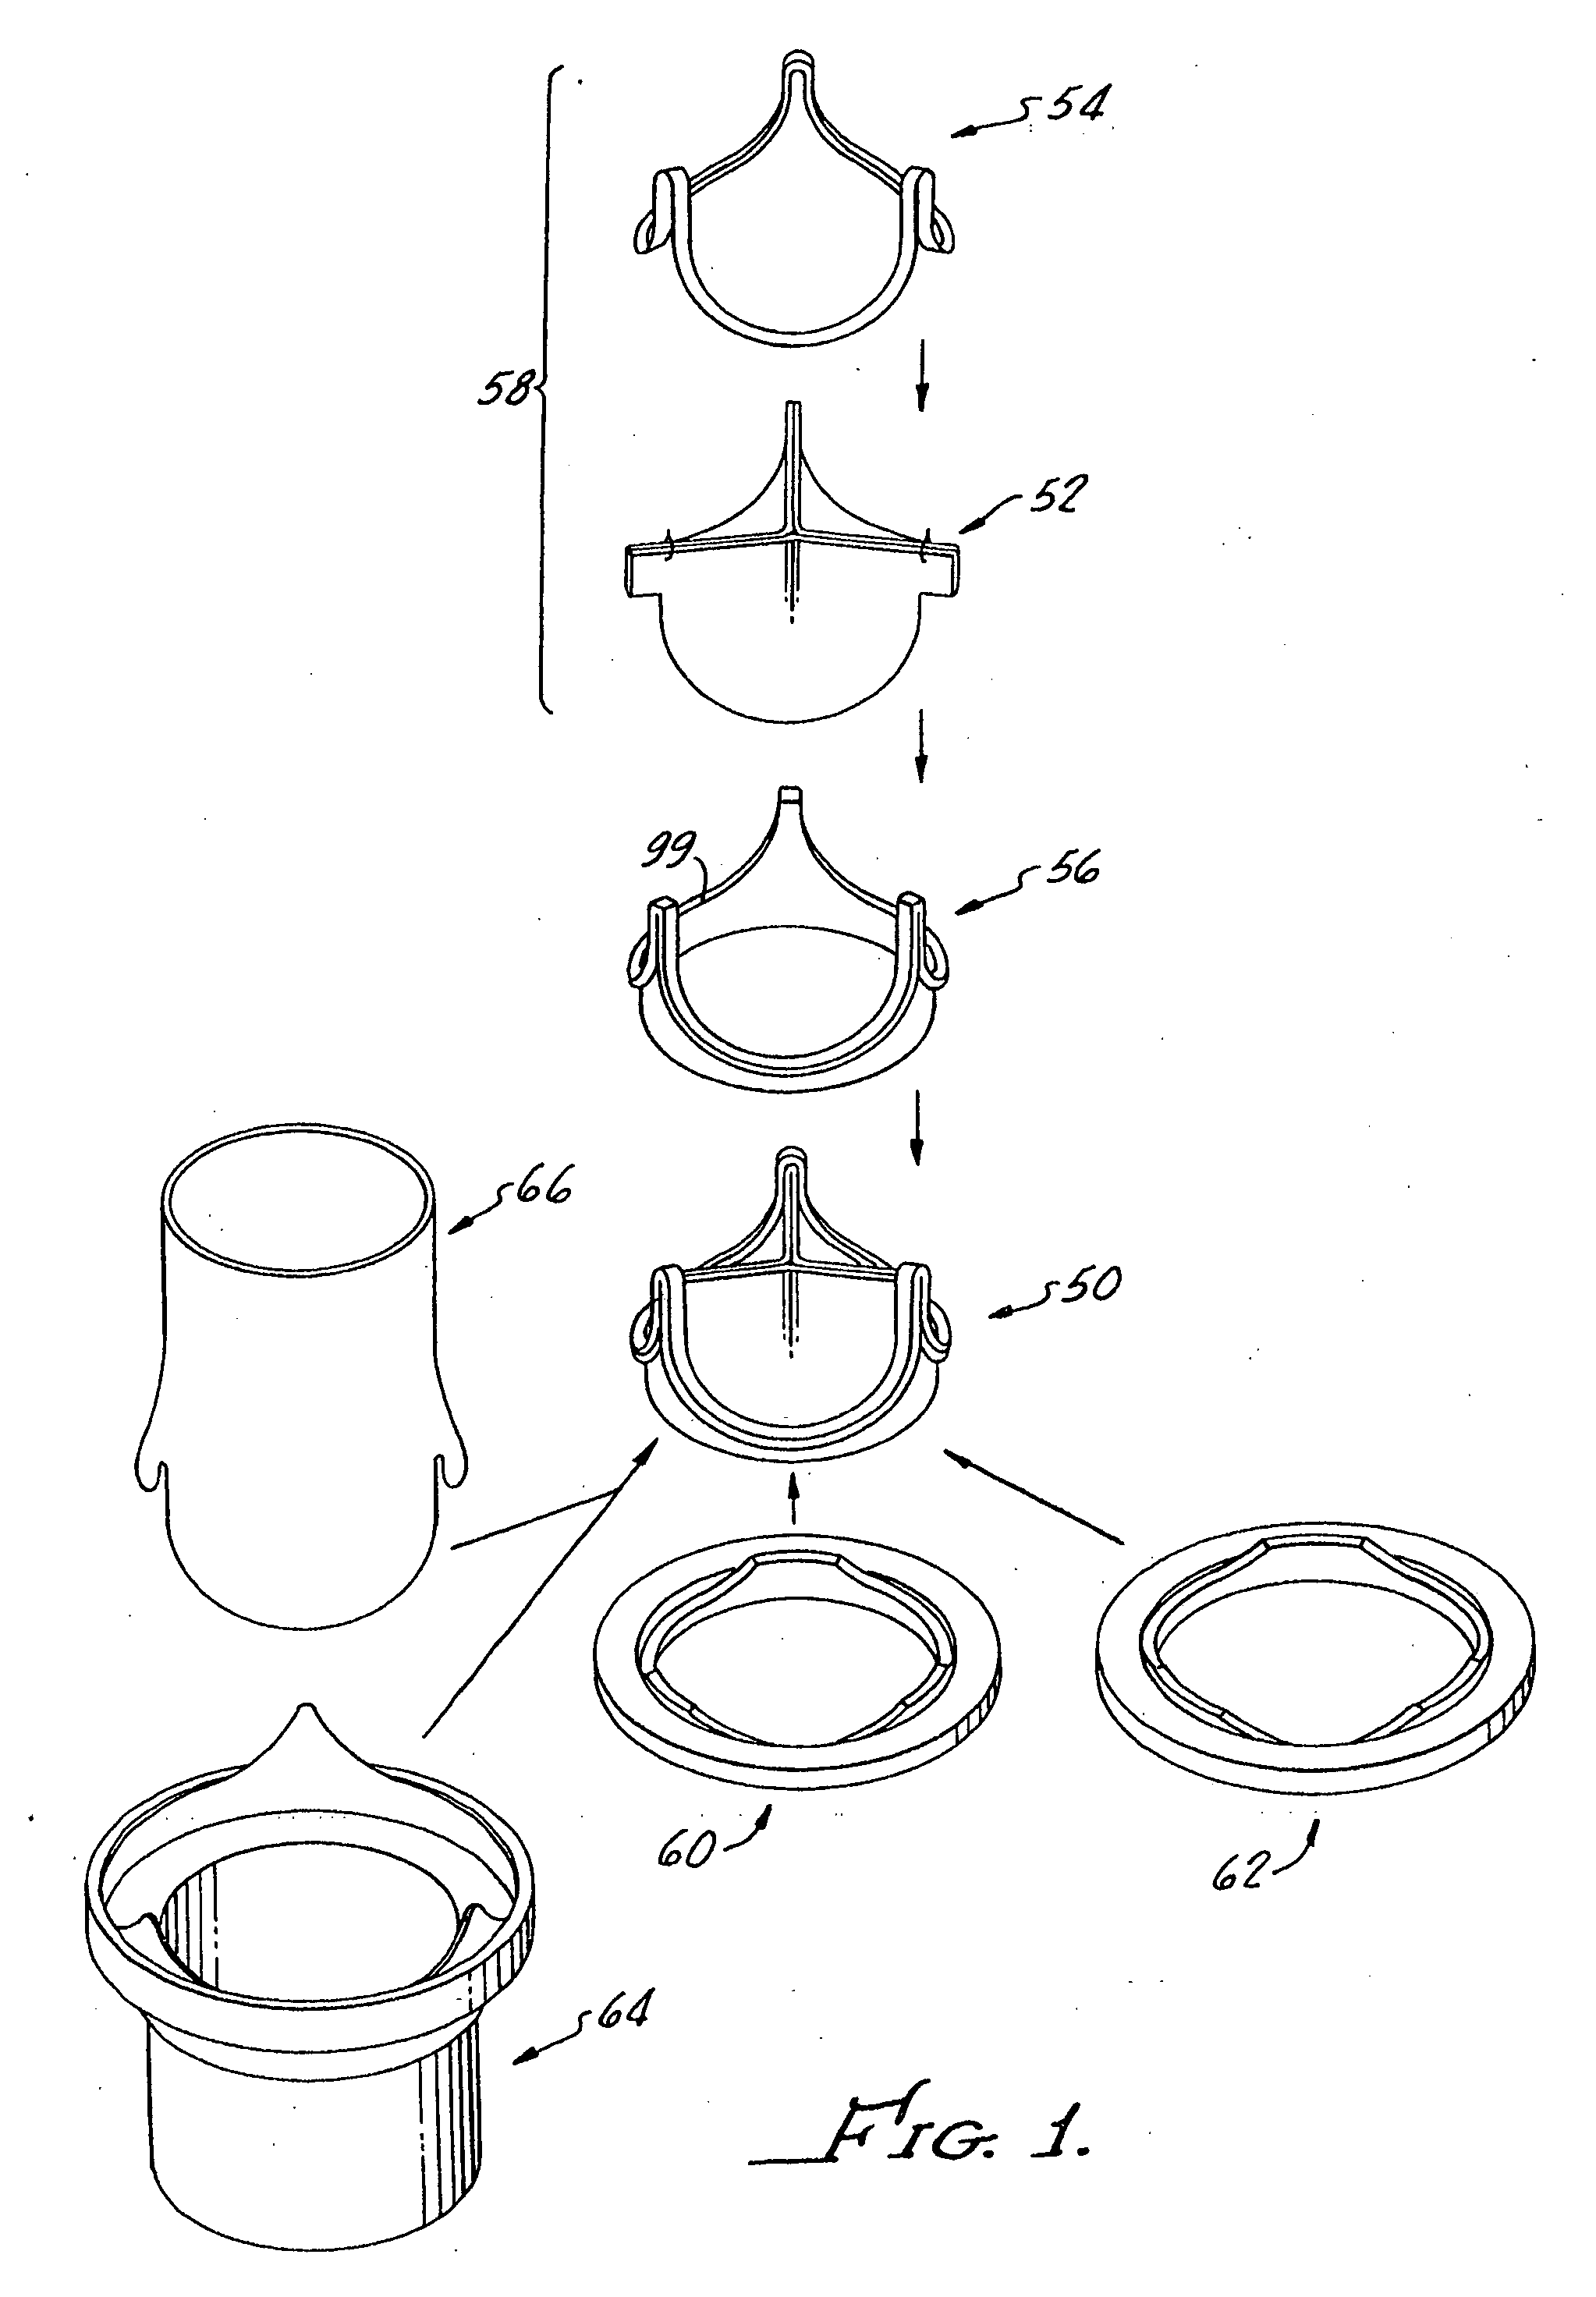 Contoured heart valve suture rings